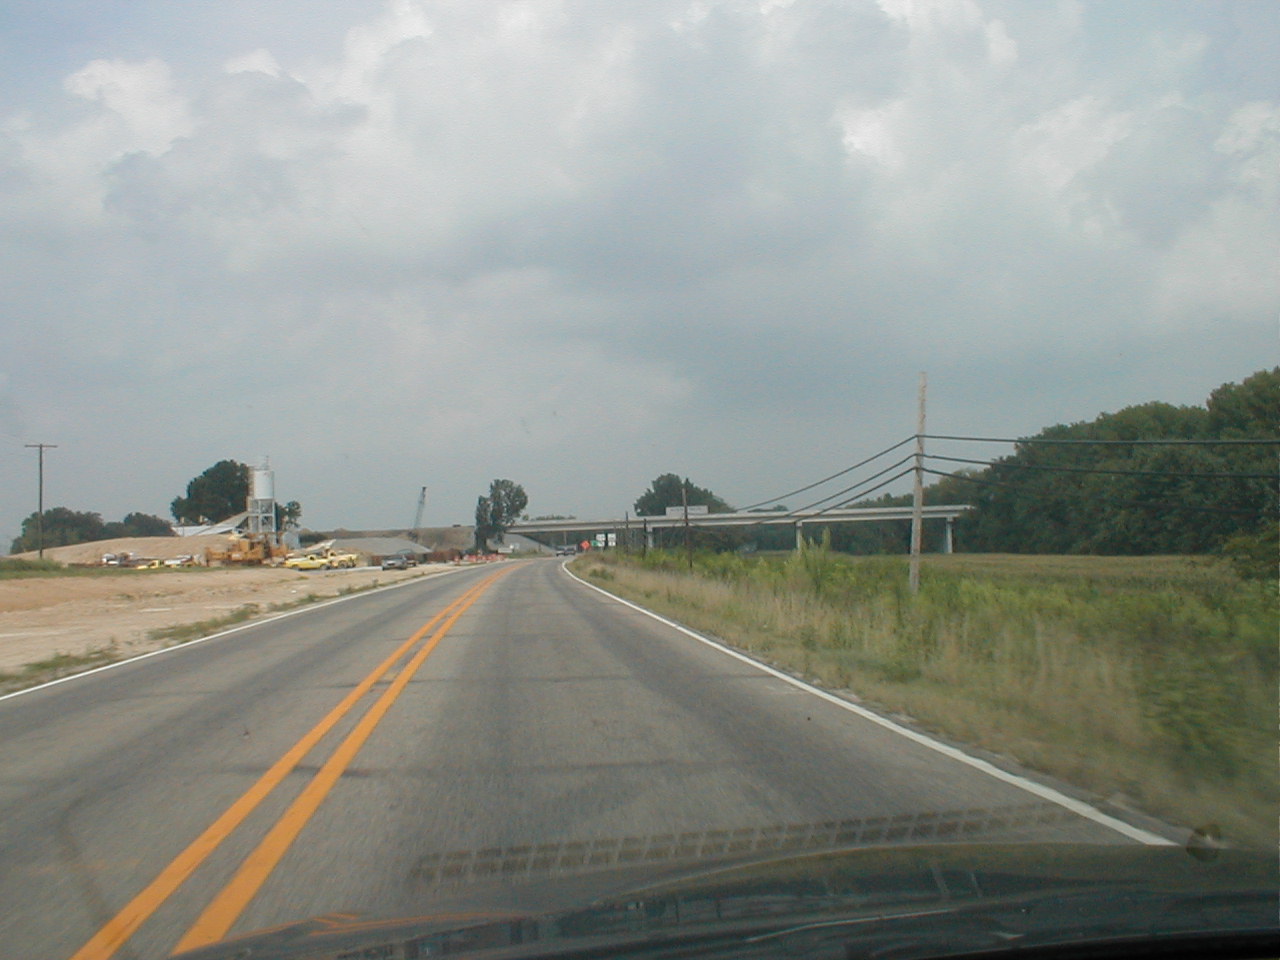 The Indiana approach to the bridge.